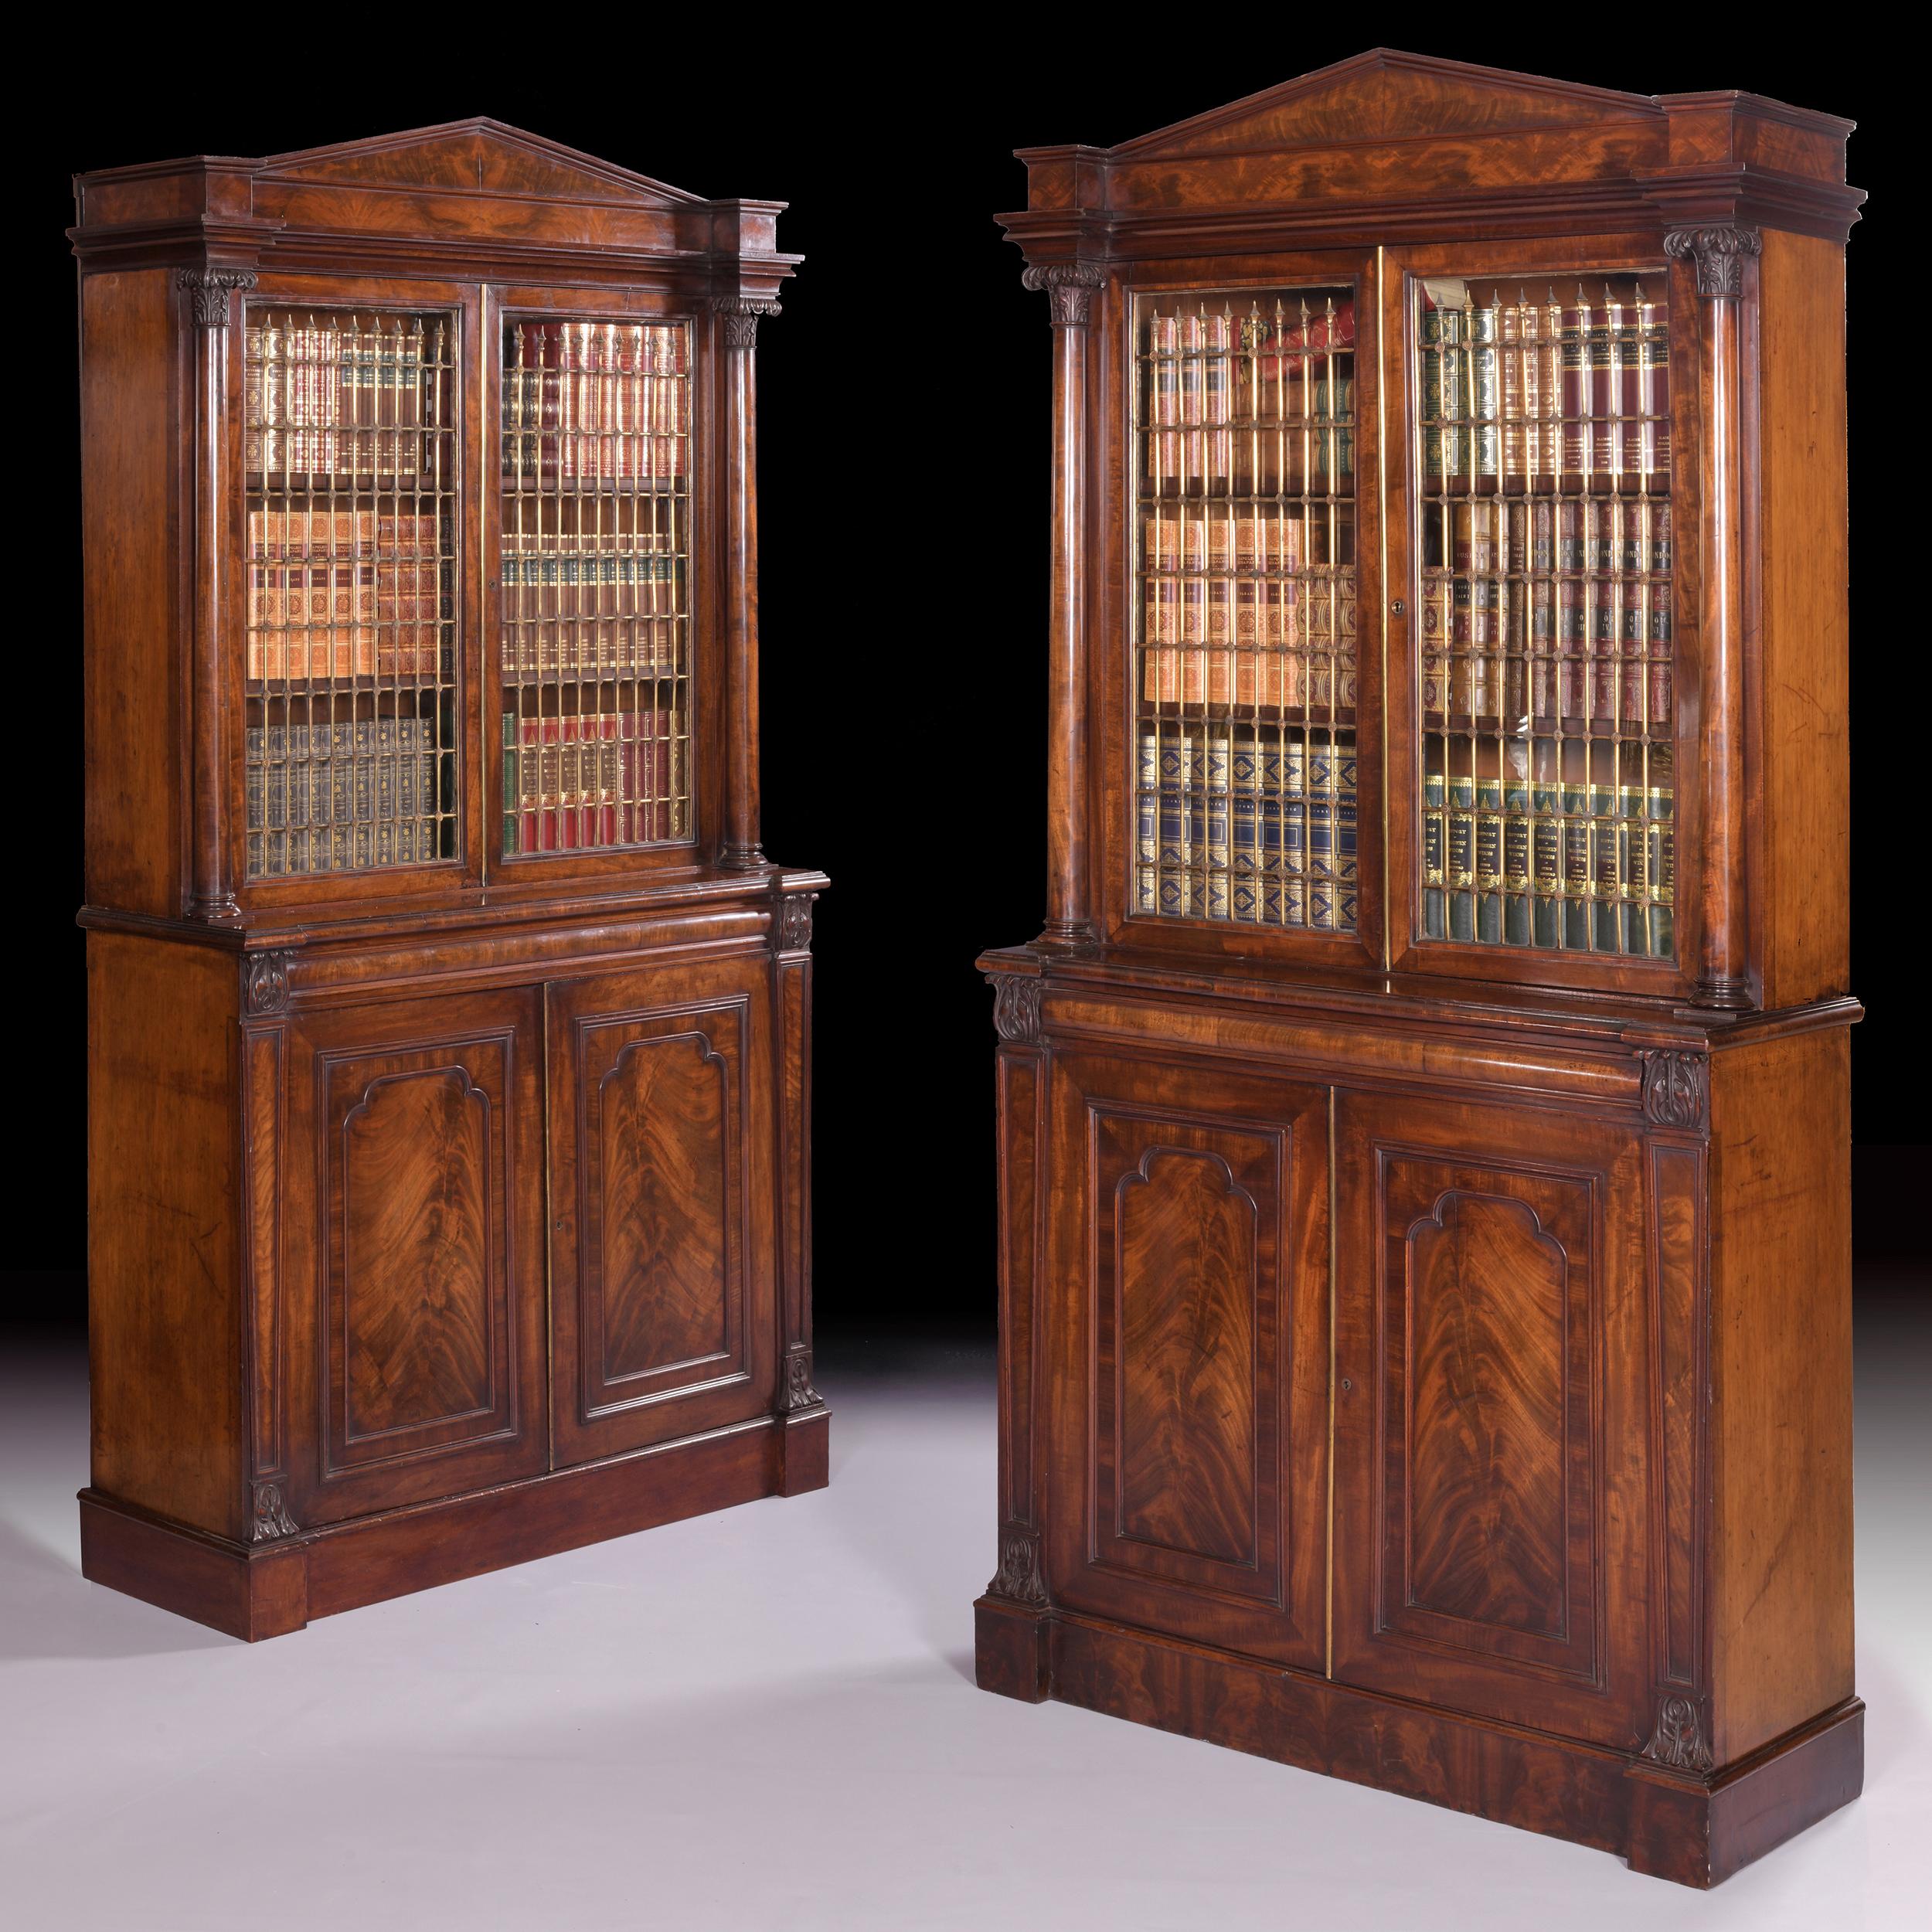 An exceptional pair of English Regency mahogany architectural bookcases by Gillows Of Lancaster.

The moulded architectural cornice above a pair of glazed and brass panelled doors flanked with lotus carved capitals, which open to reveal adjustable